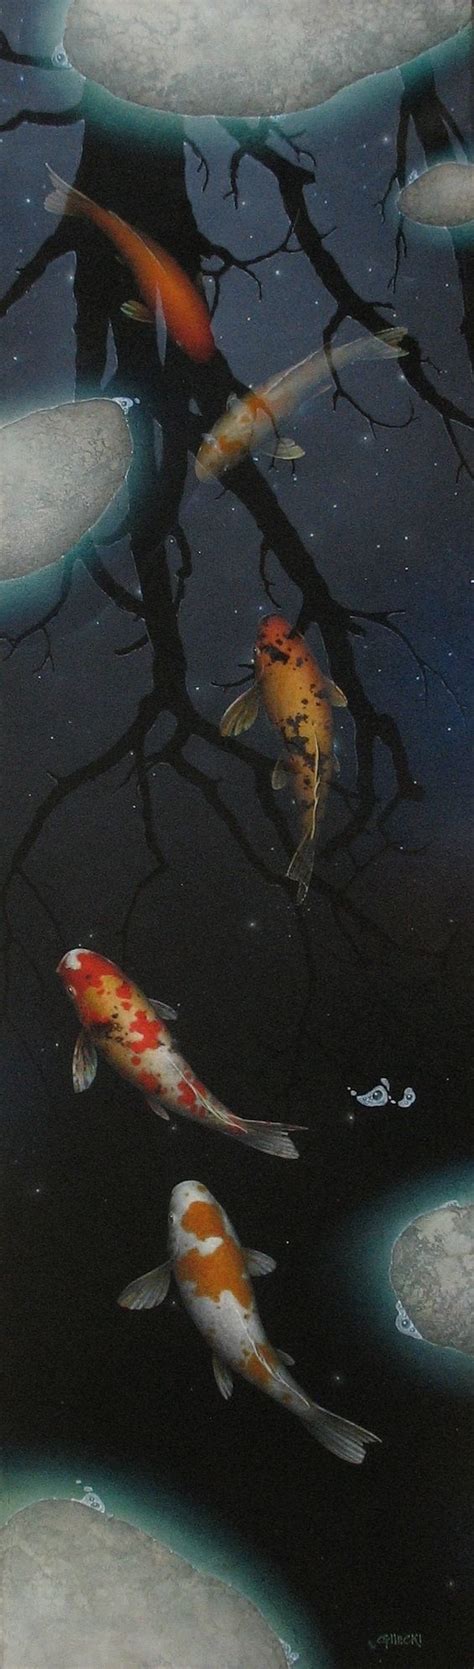 New Recent Work Archives Koi Fish Paintings By Terry Gilecki Koi